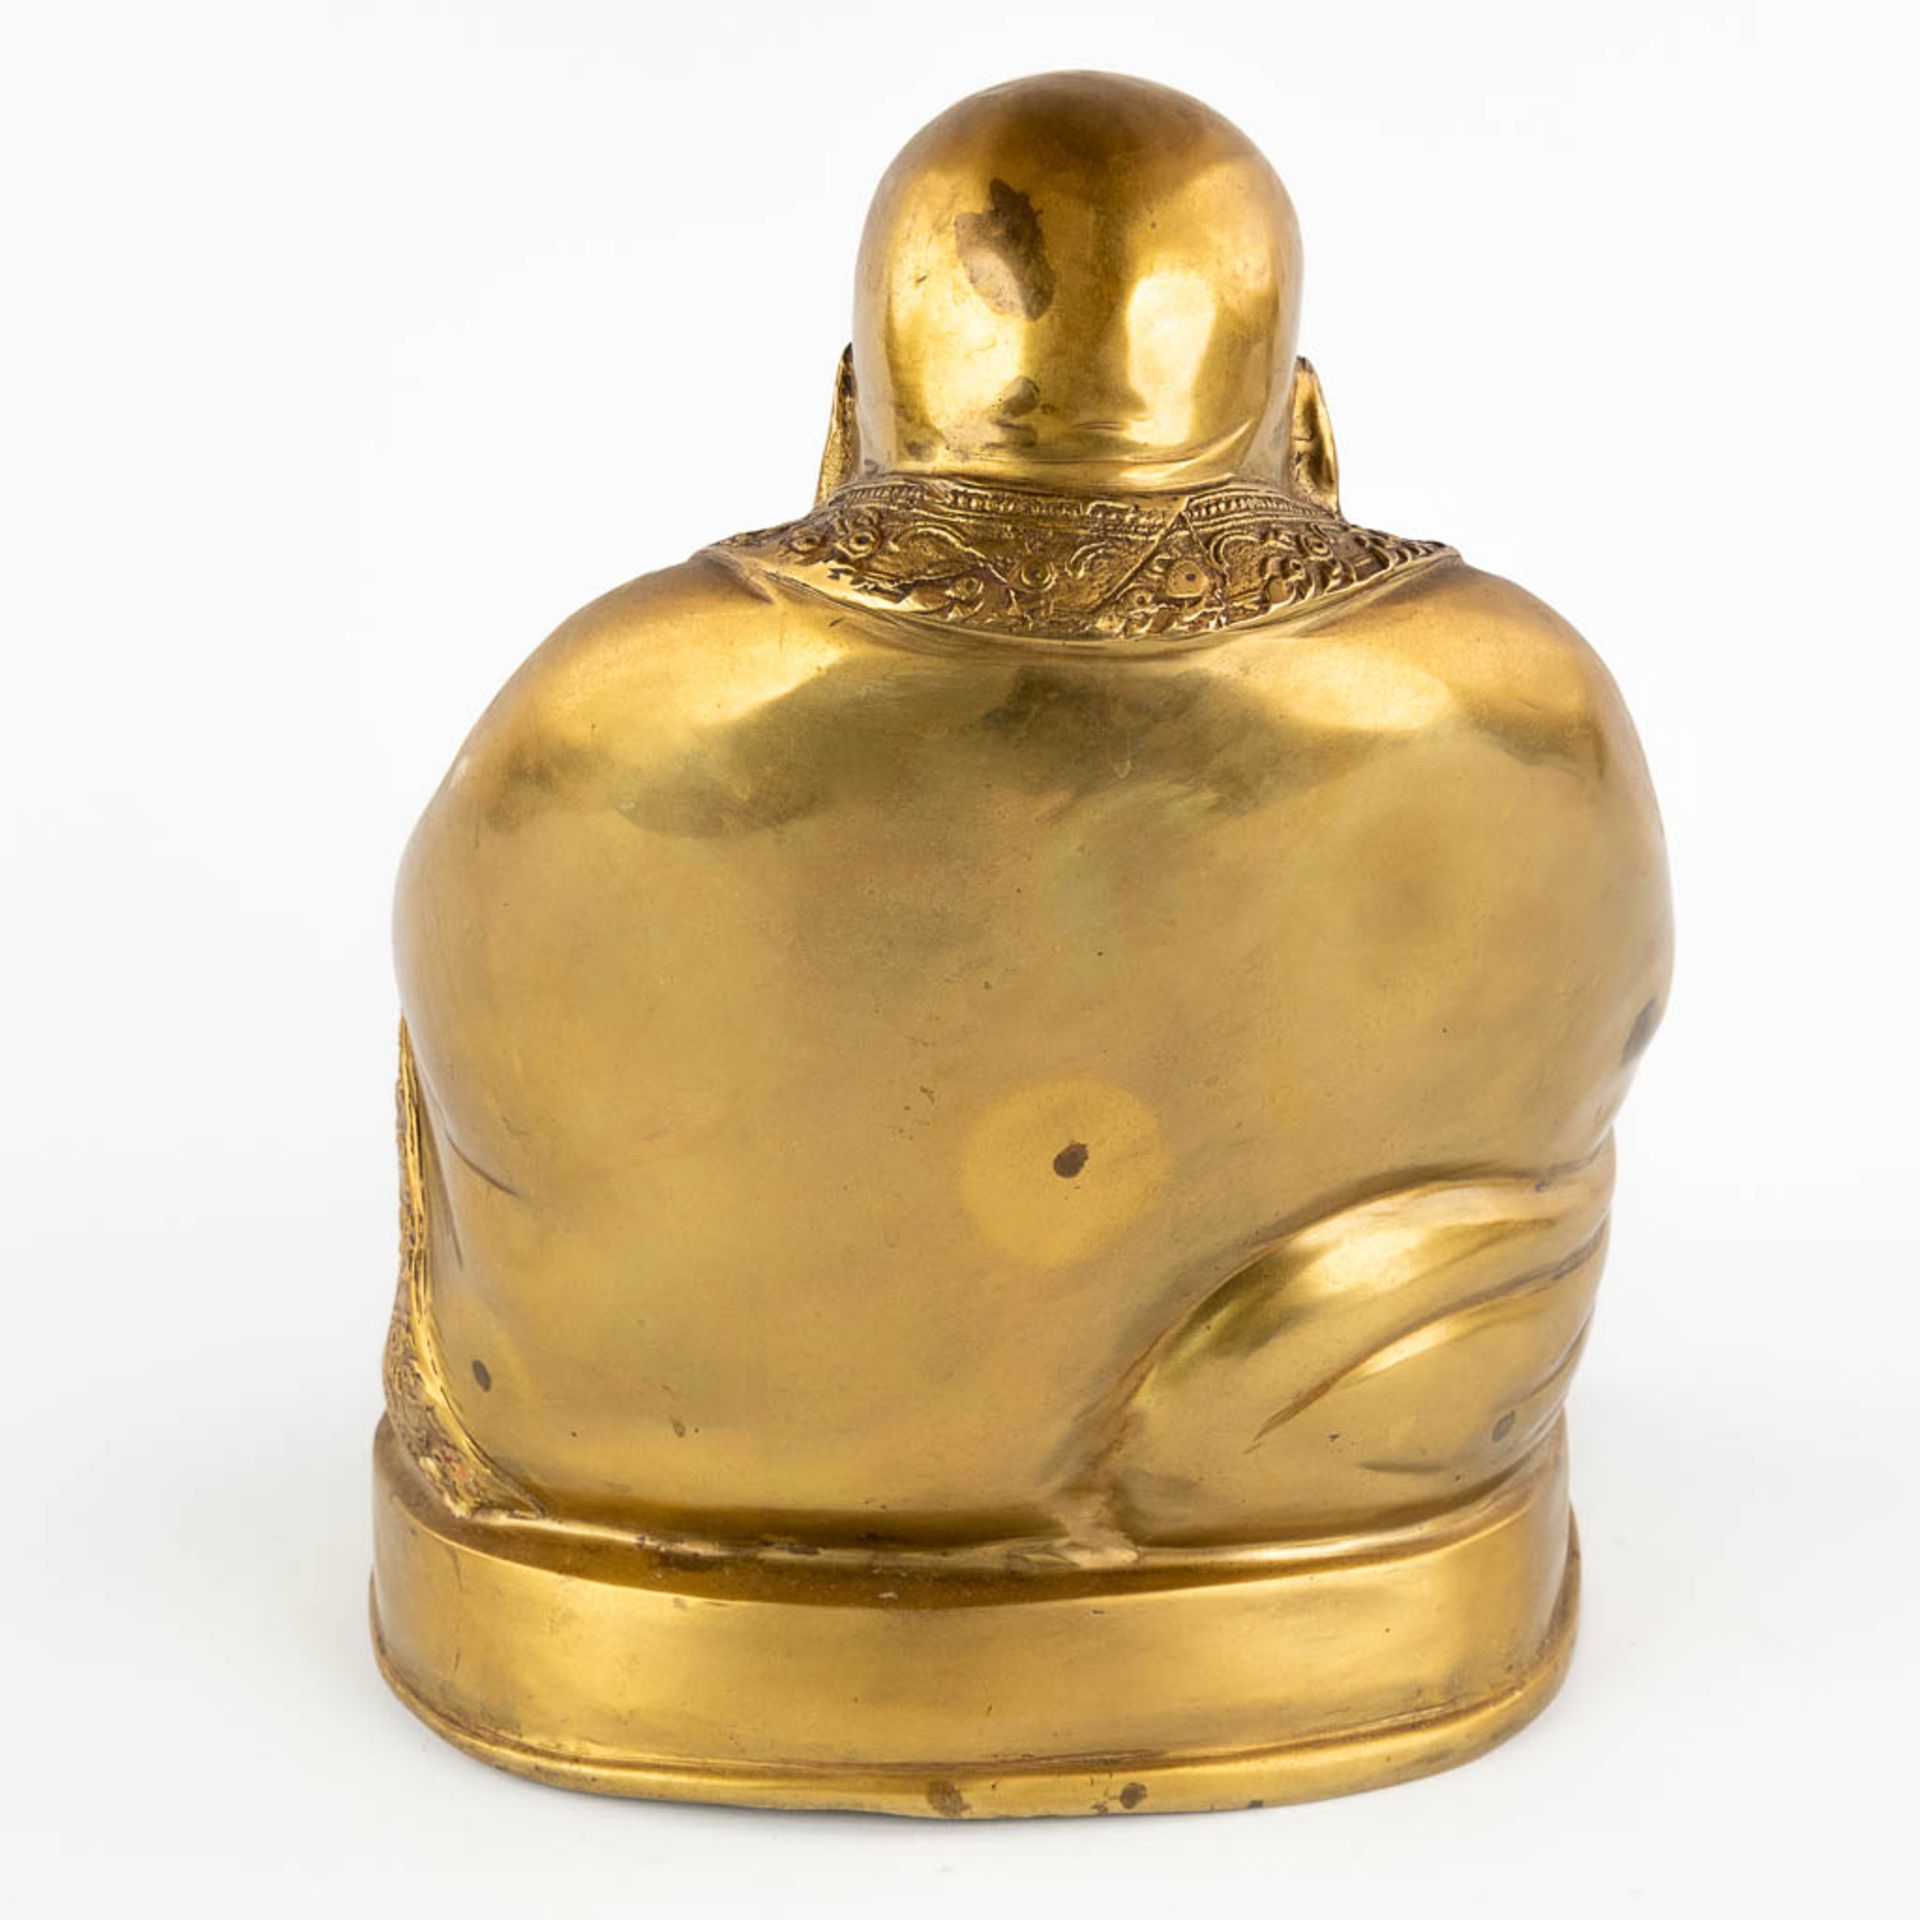 A Chinese laughing buddha, polished bronze. (L:27 x W:27 x H:34 cm) - Image 5 of 11